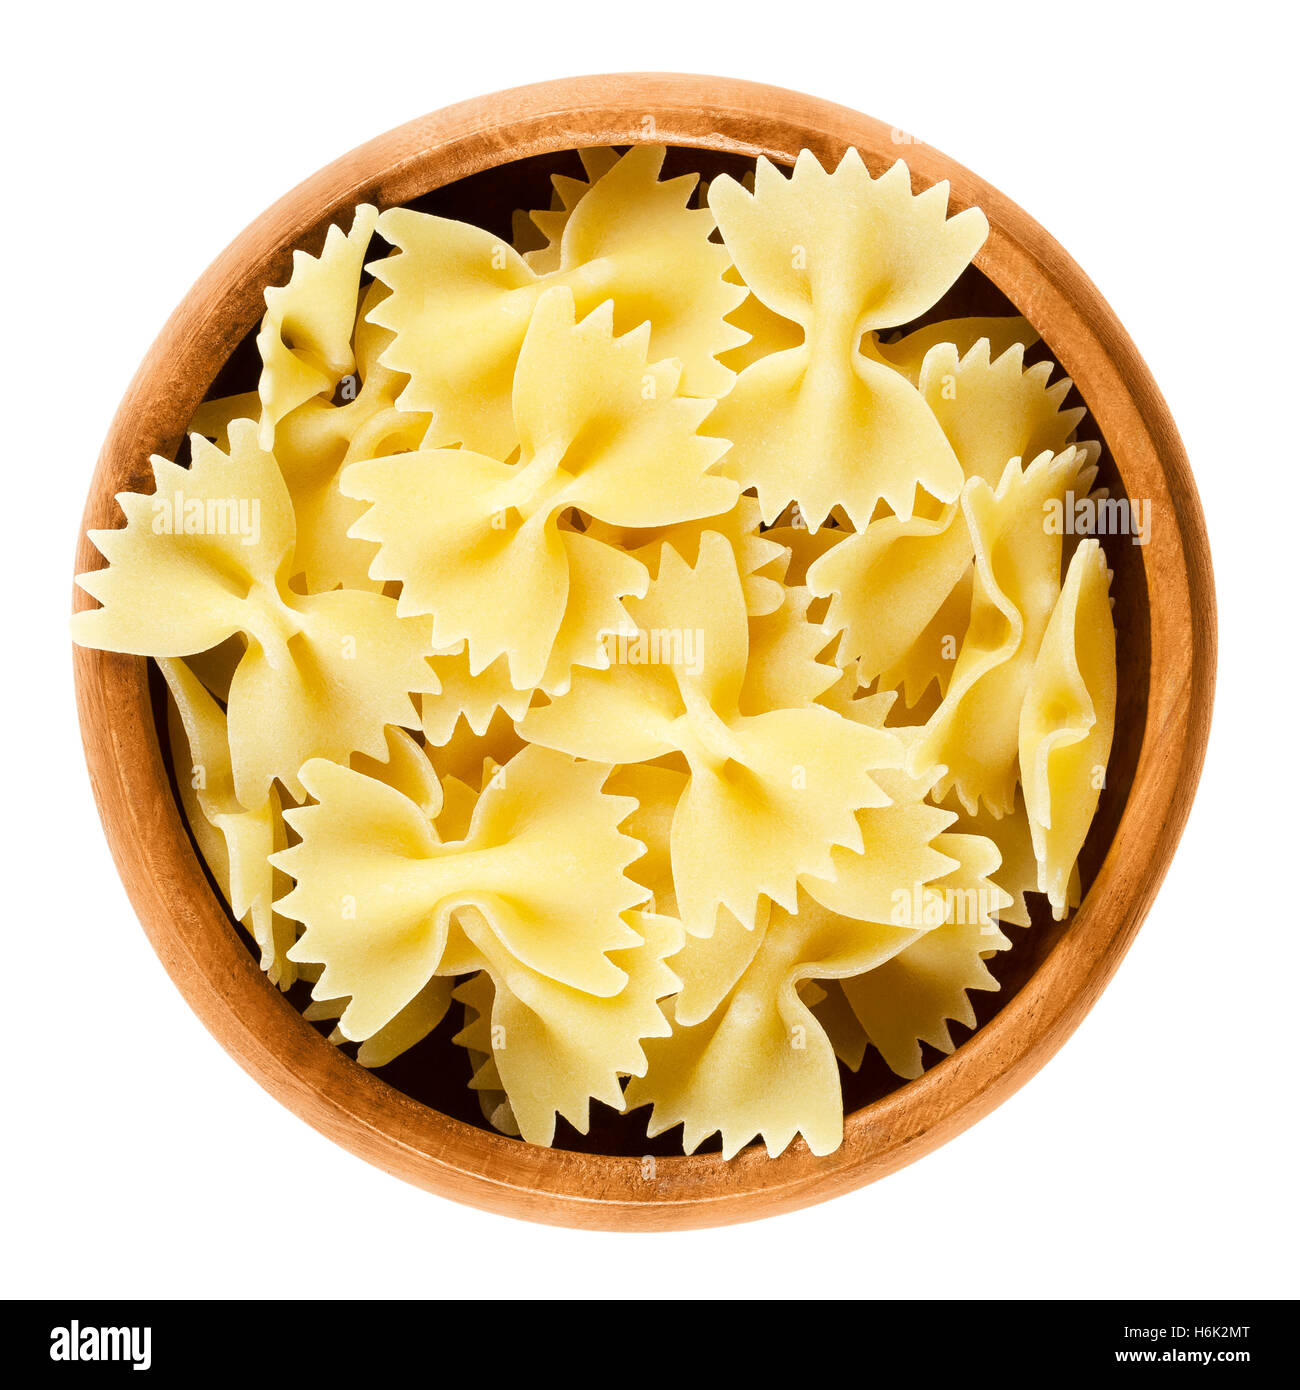 Farfalle pasta in wooden bowl. Uncooked dried durum wheat semolina pasta. Decorative short-cut bow tie or butterfly shaped. Stock Photo